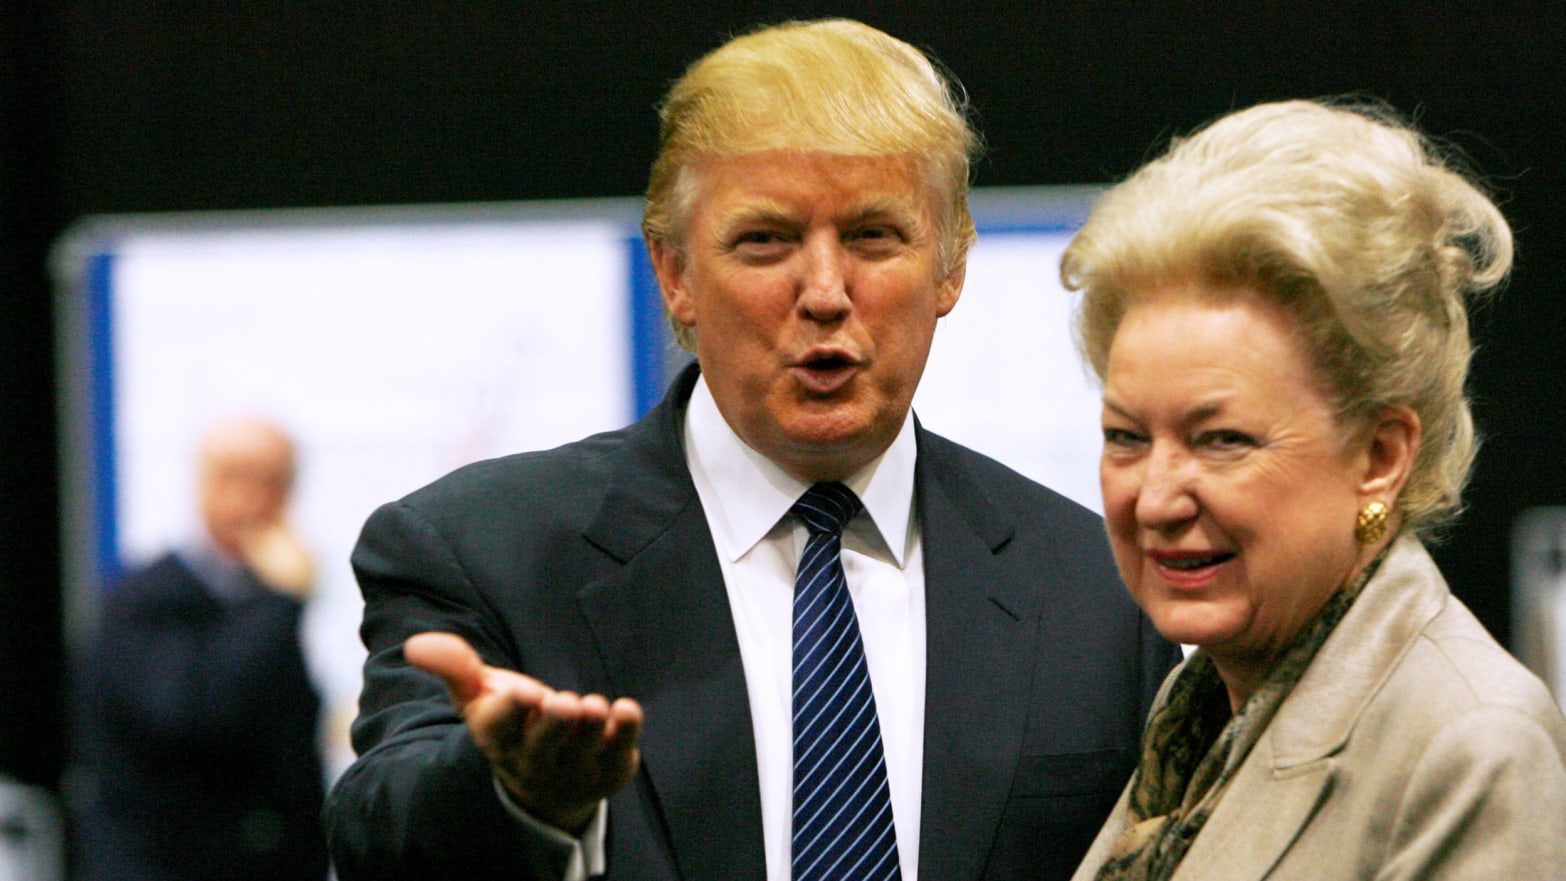 Donald Trump gestures as he stands next to his sister Maryanne Trump Barry.